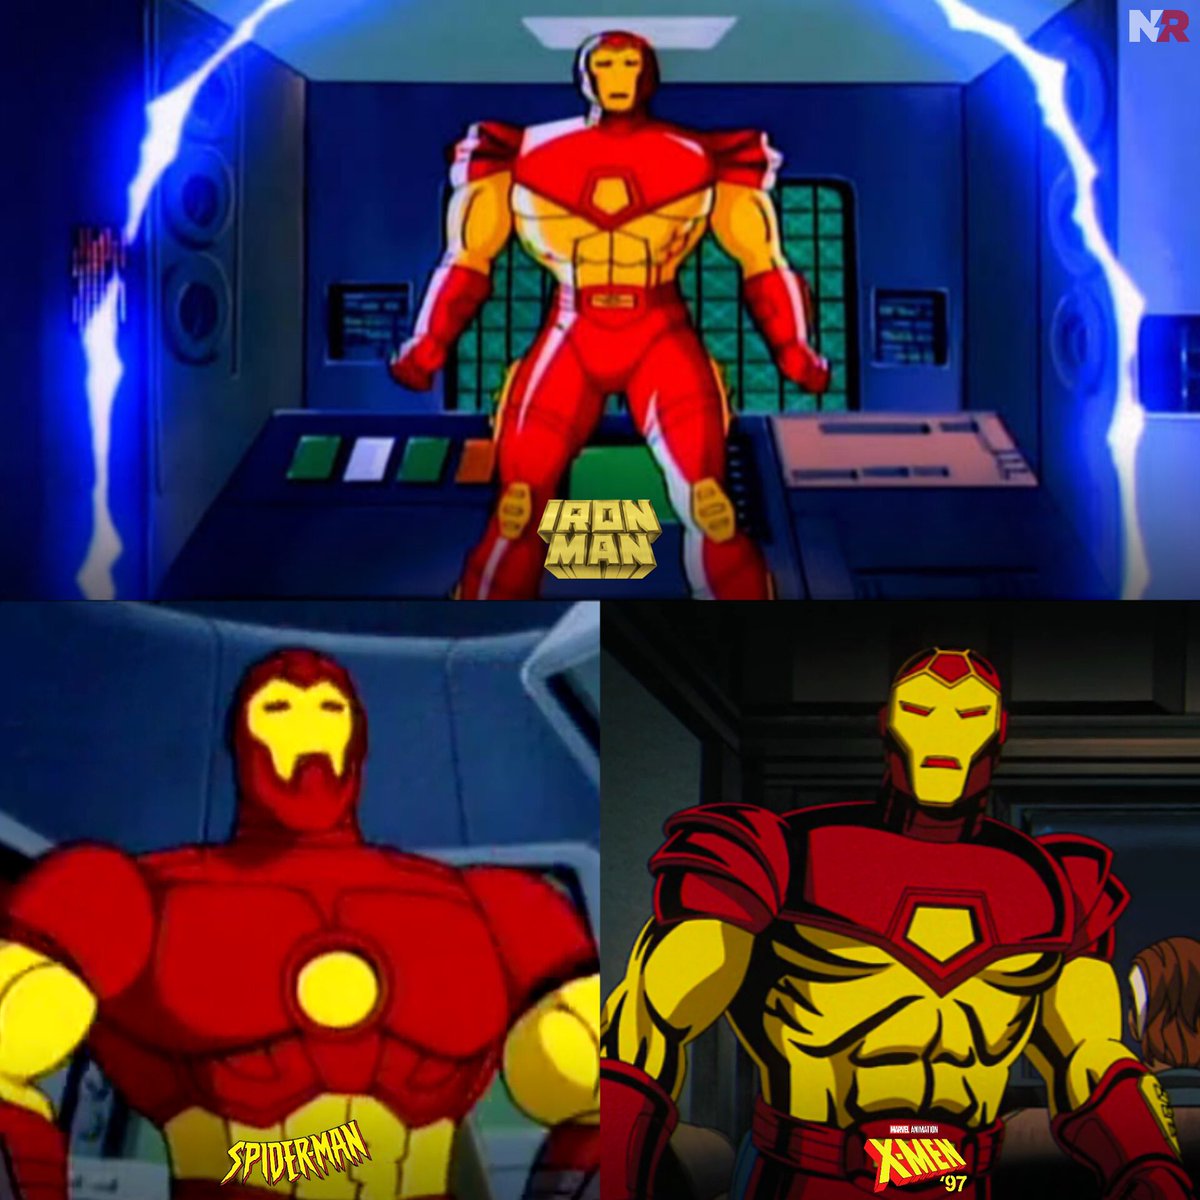 Iron Man’s animated suits.